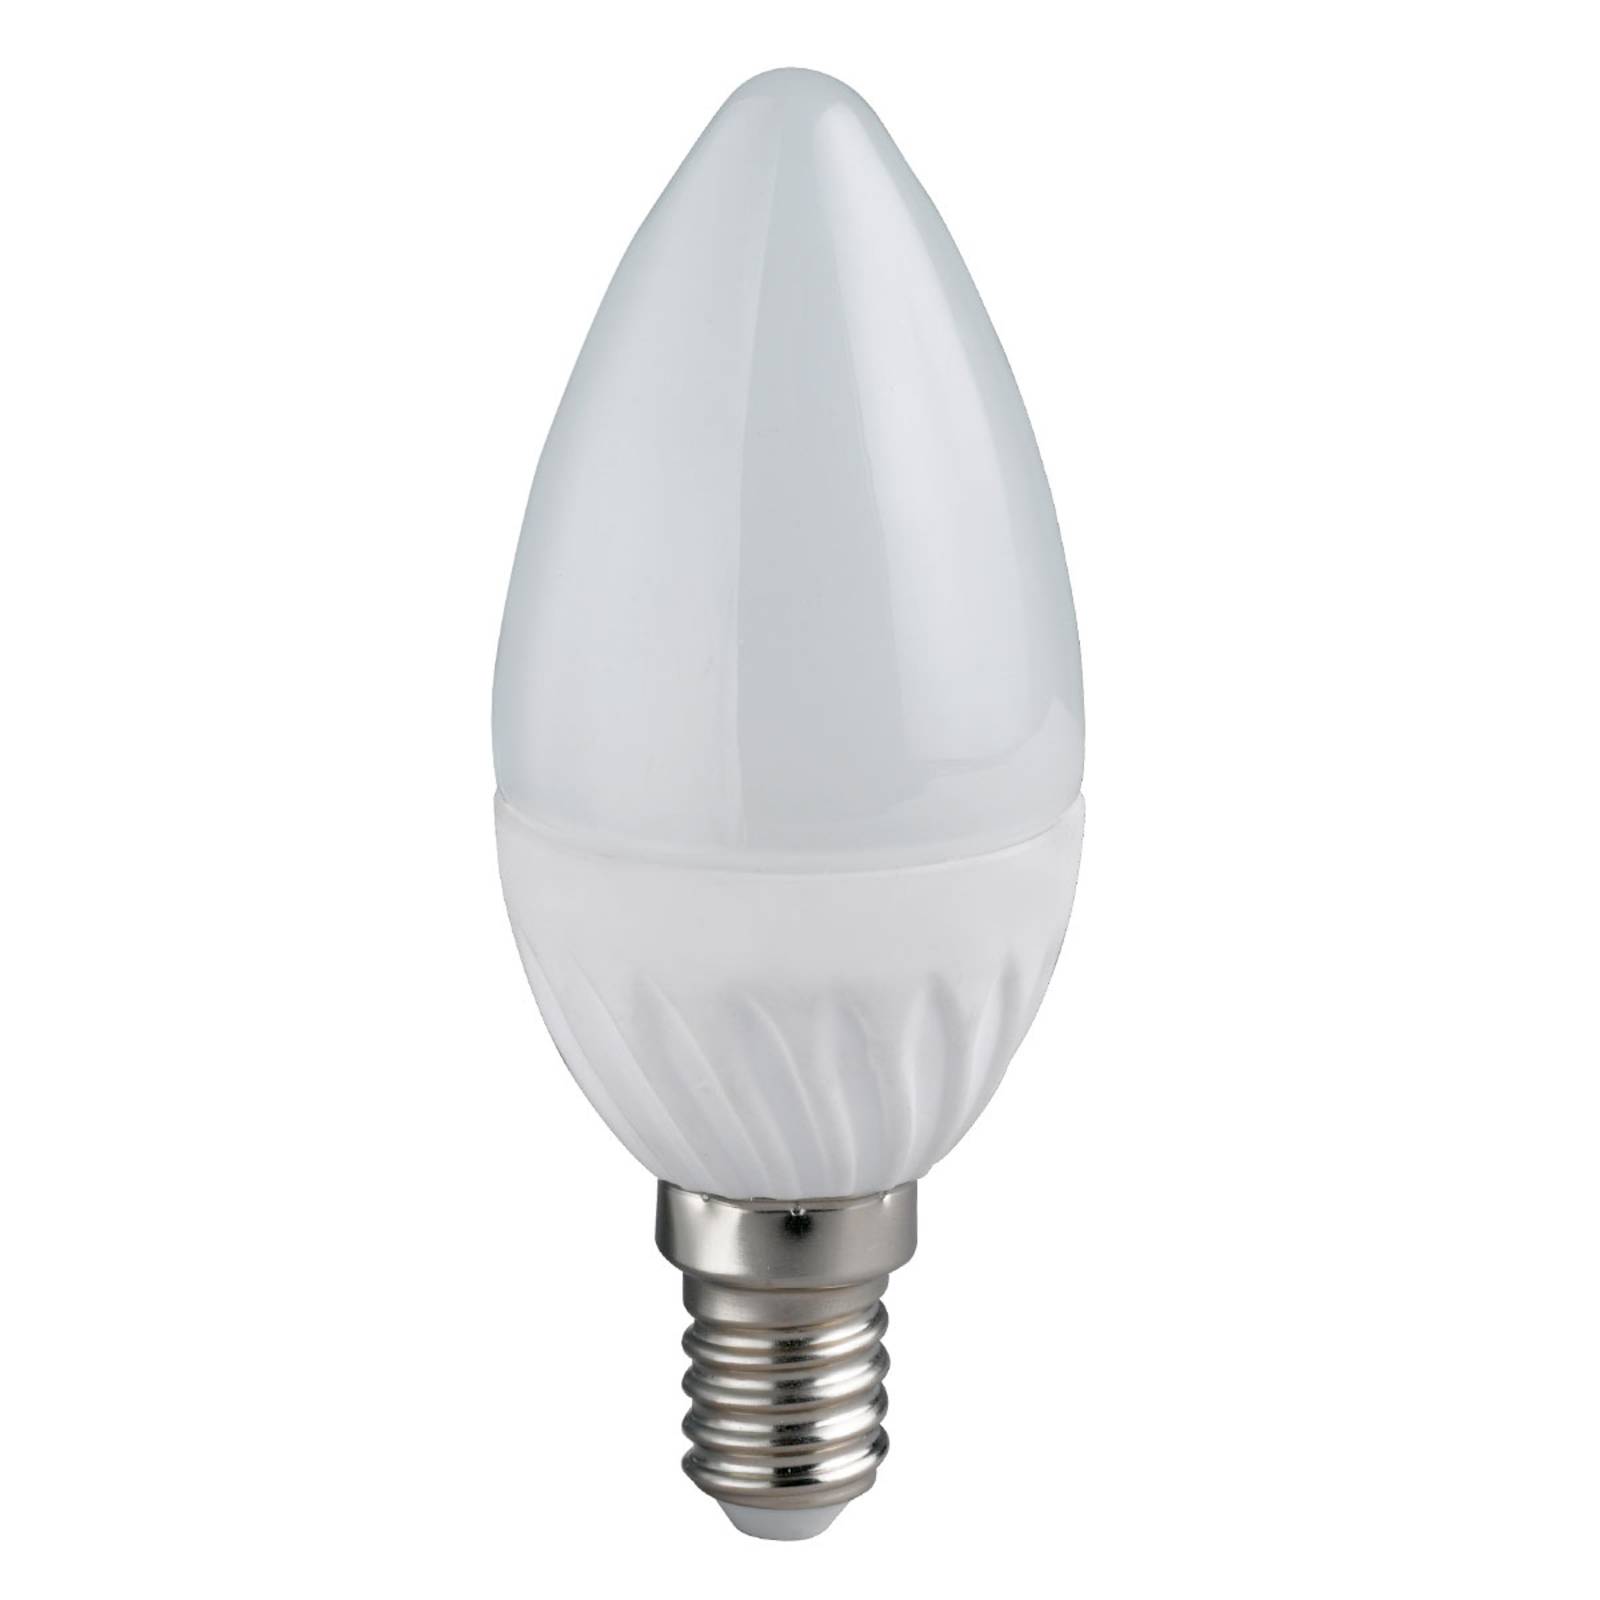 Trio Lighting Ampoule bougie LED E14 5 W dimmable, blanc chaud